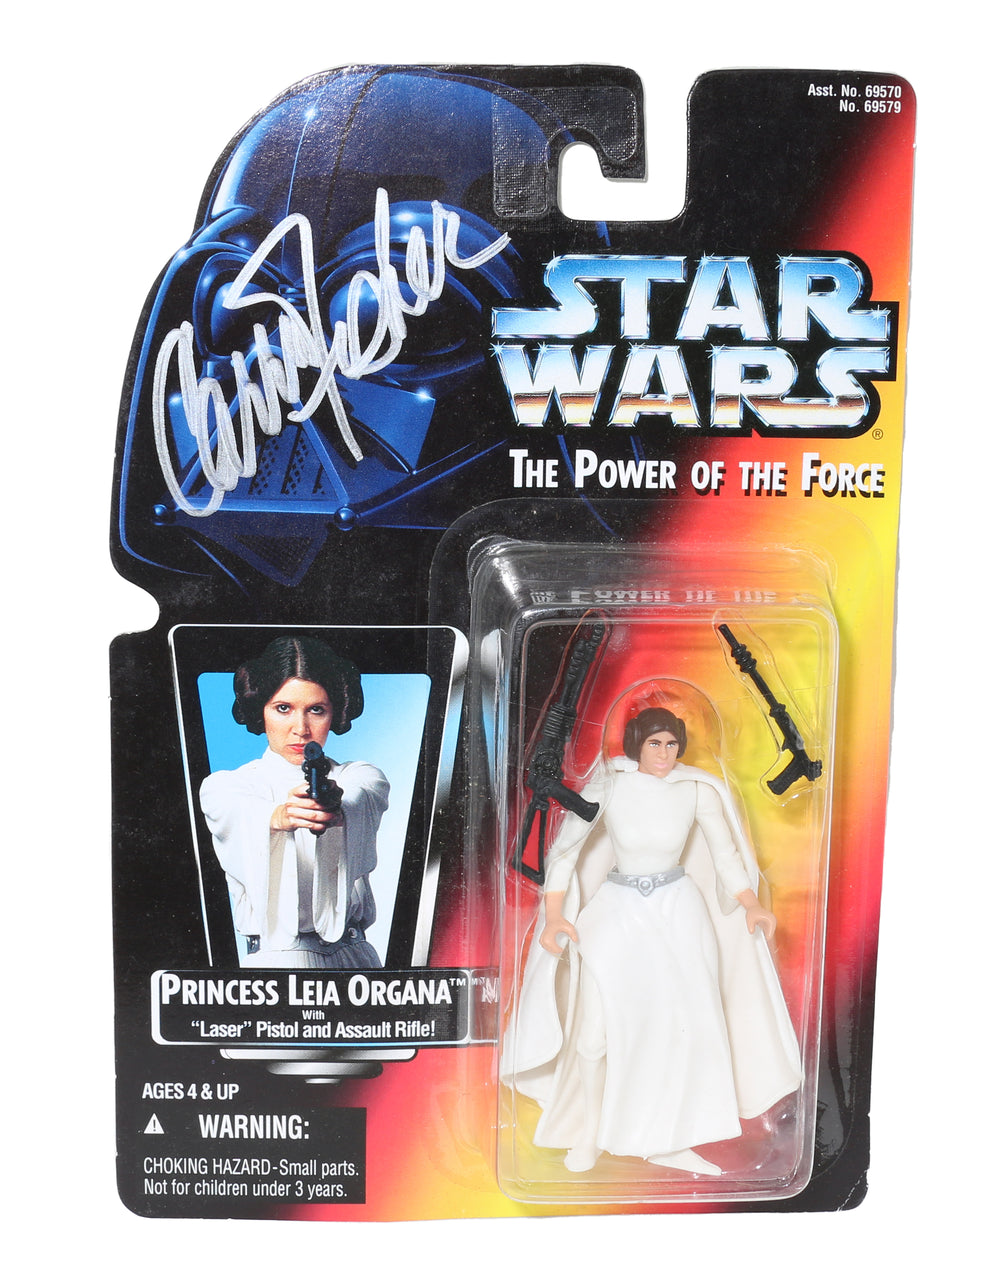 Carrie Fisher as Princess Leia from Star Wars: A New Hope POTF Power of the Force Action Figure